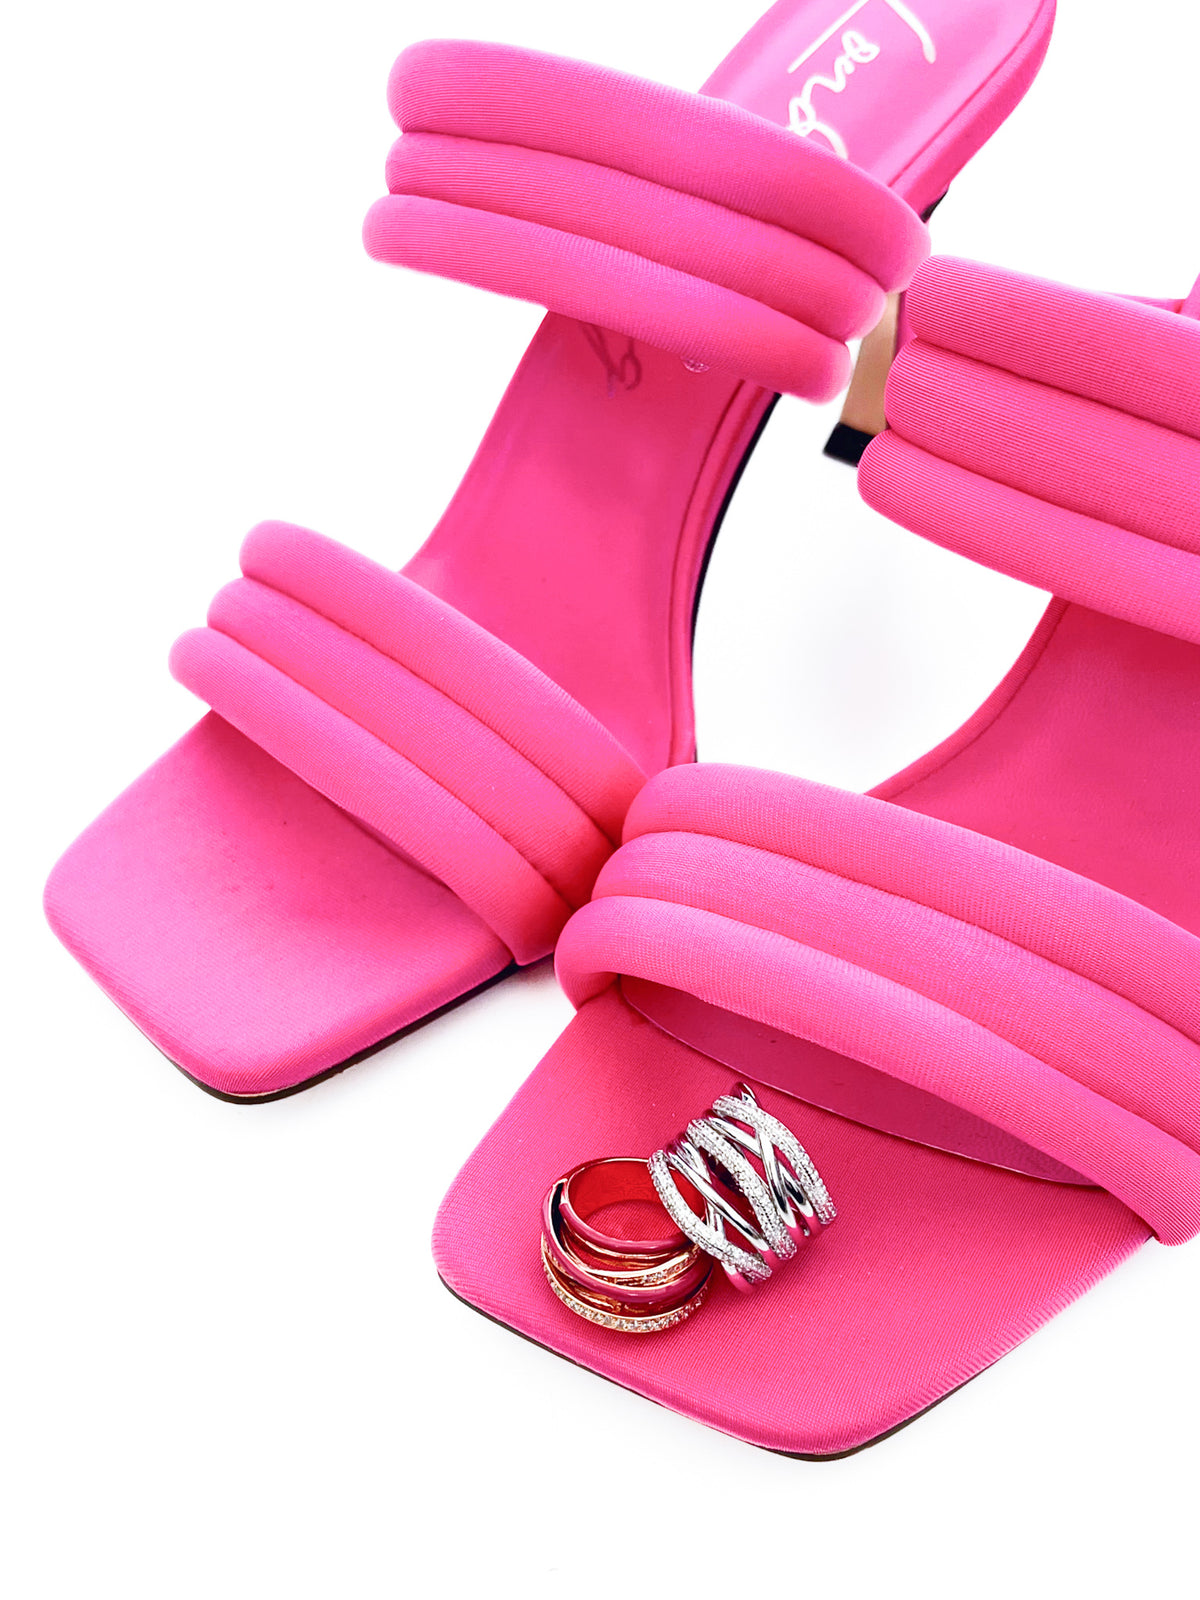 Pre Order - Quilted Spool Heeled Sandals - Fuchsia-250 Shoes-RagCompany-Coastal Bloom Boutique, find the trendiest versions of the popular styles and looks Located in Indialantic, FL